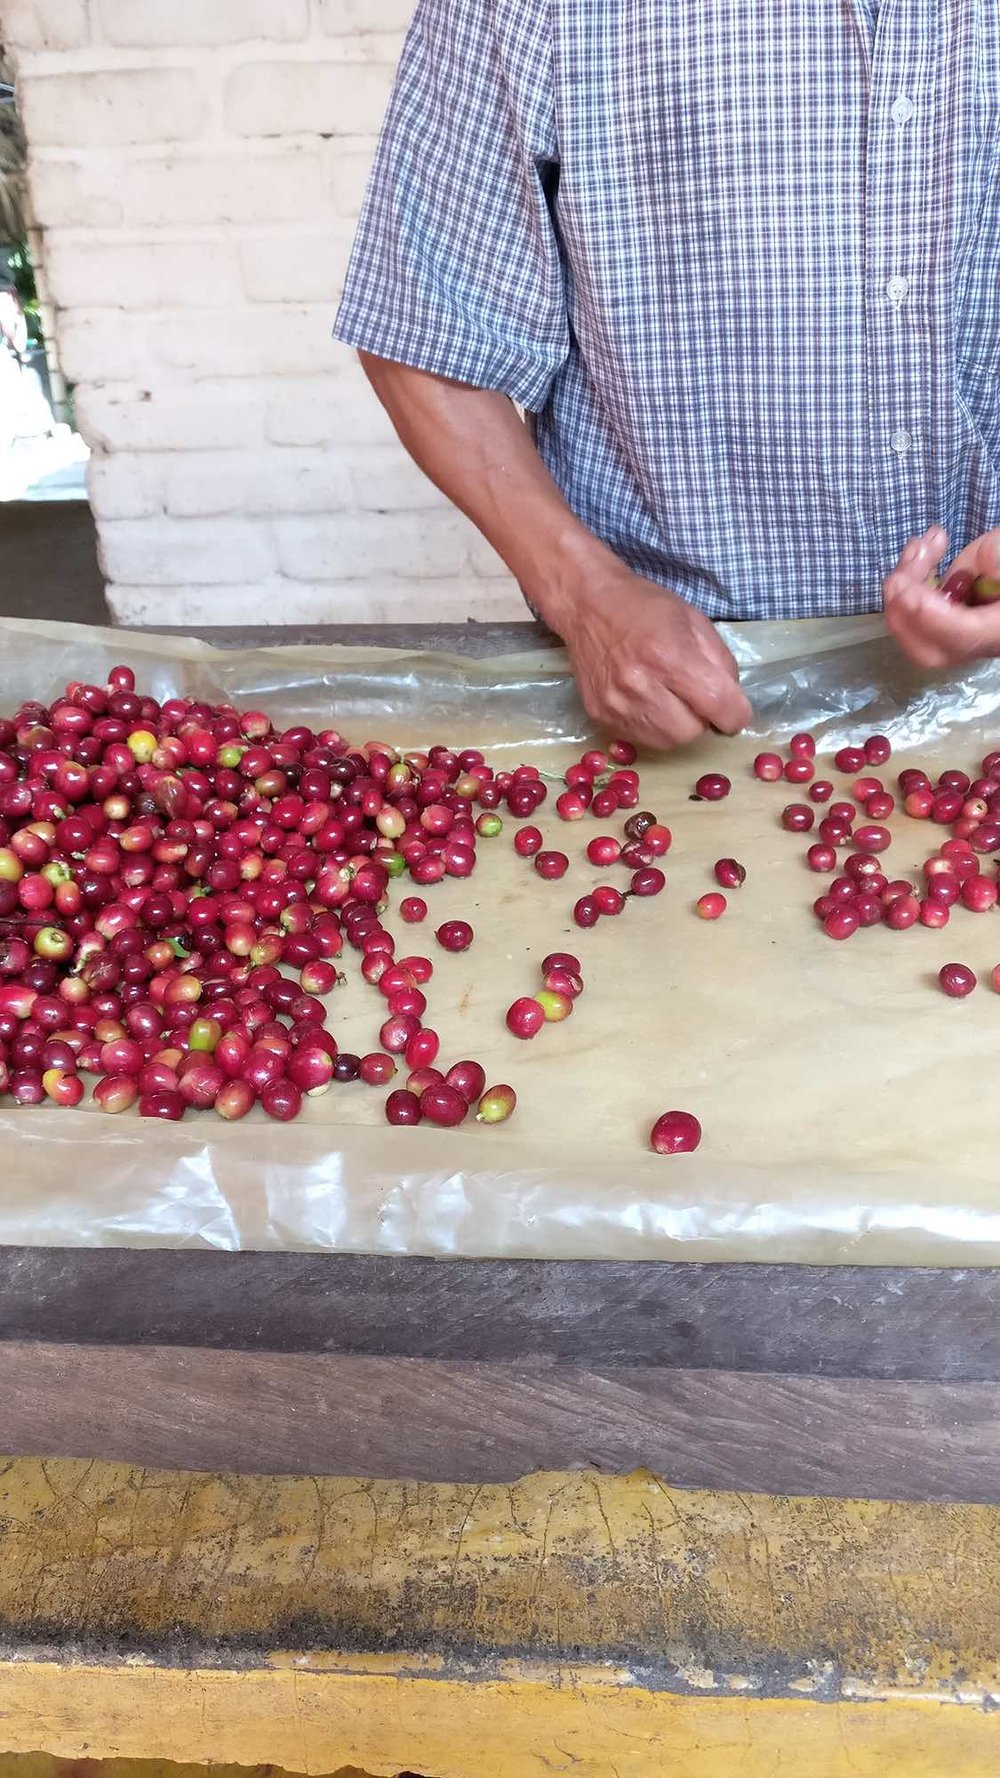 Processing coffee beans by hand